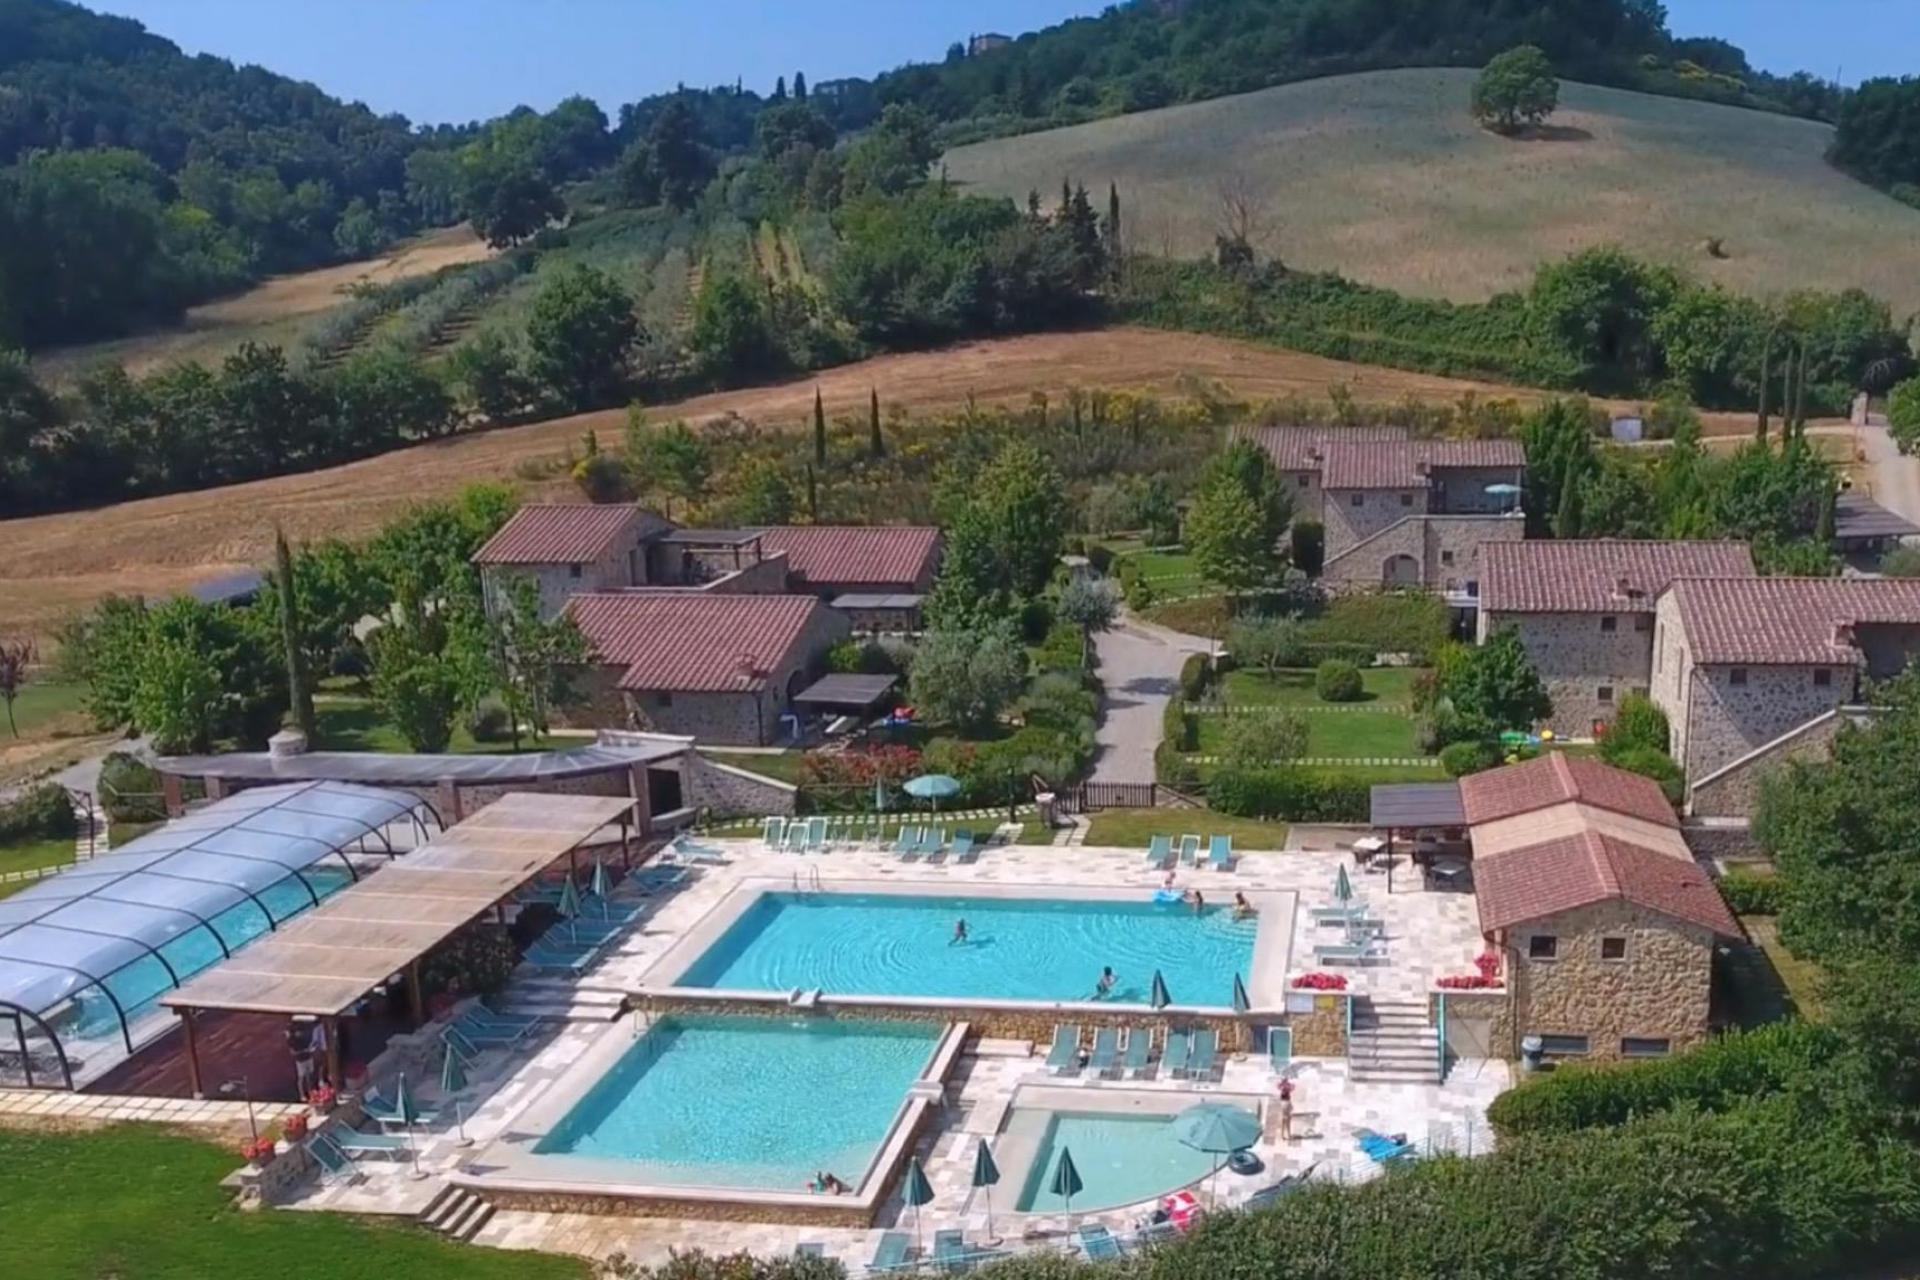 Beautiful country resort in the heart of Tuscany